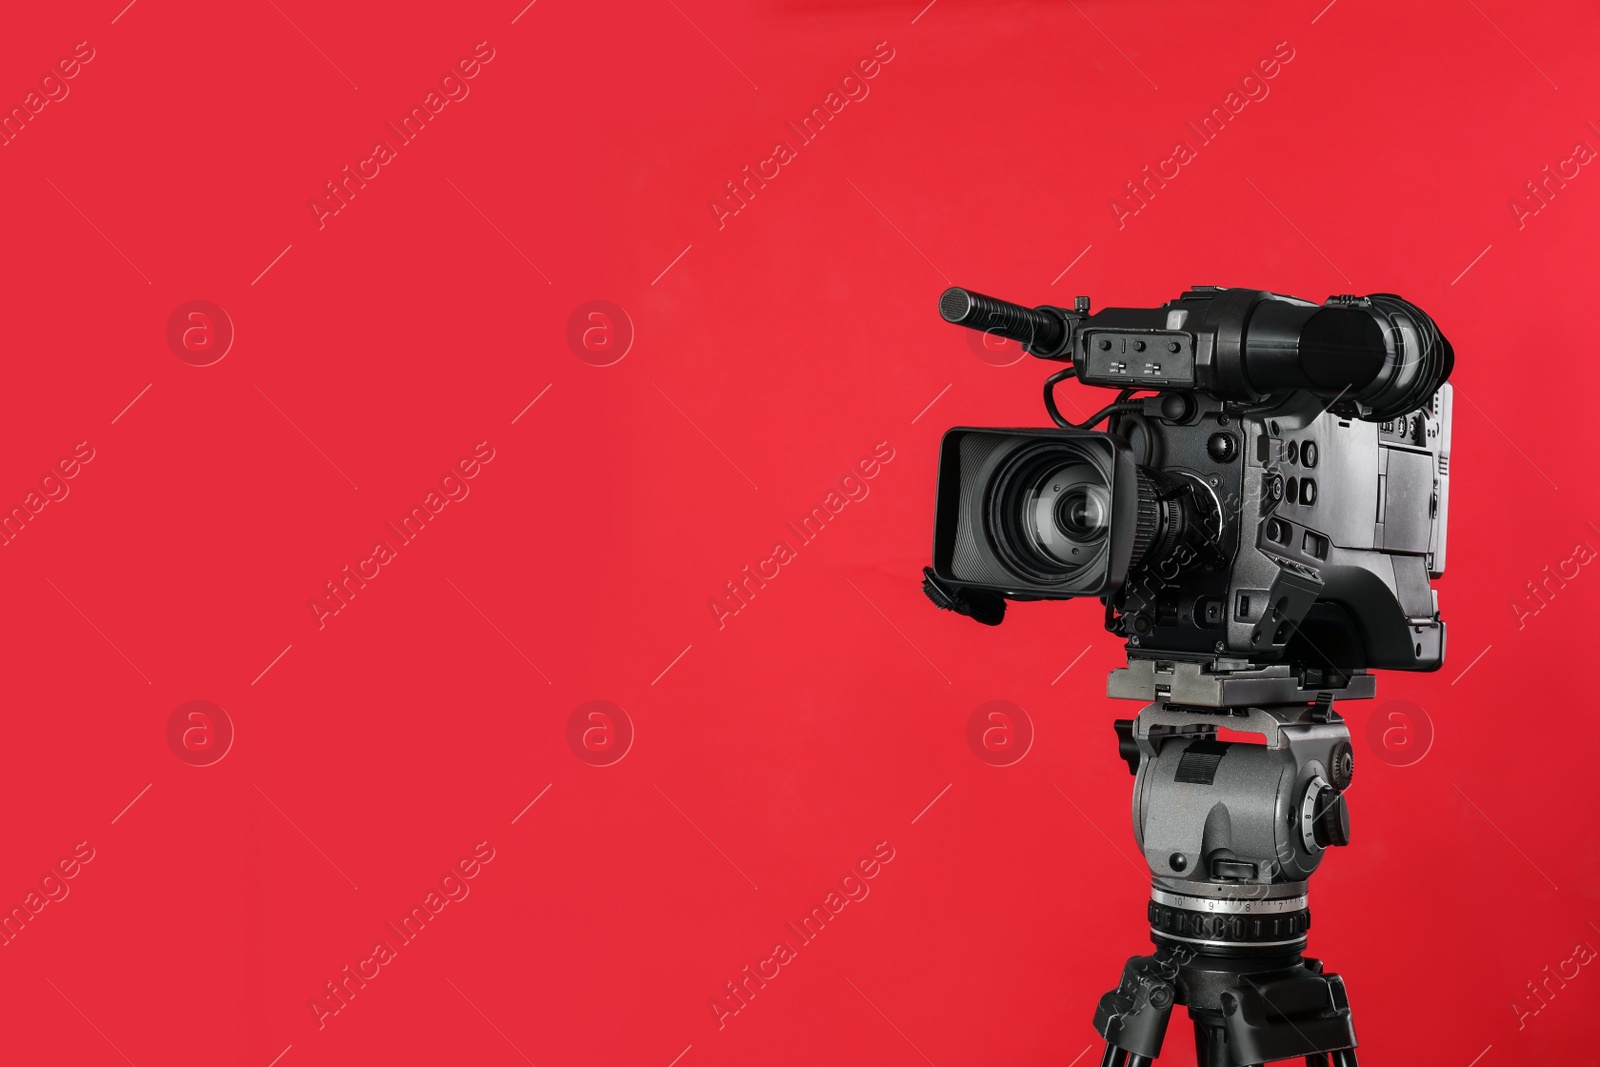 Photo of Modern professional video camera on red background. Space for text